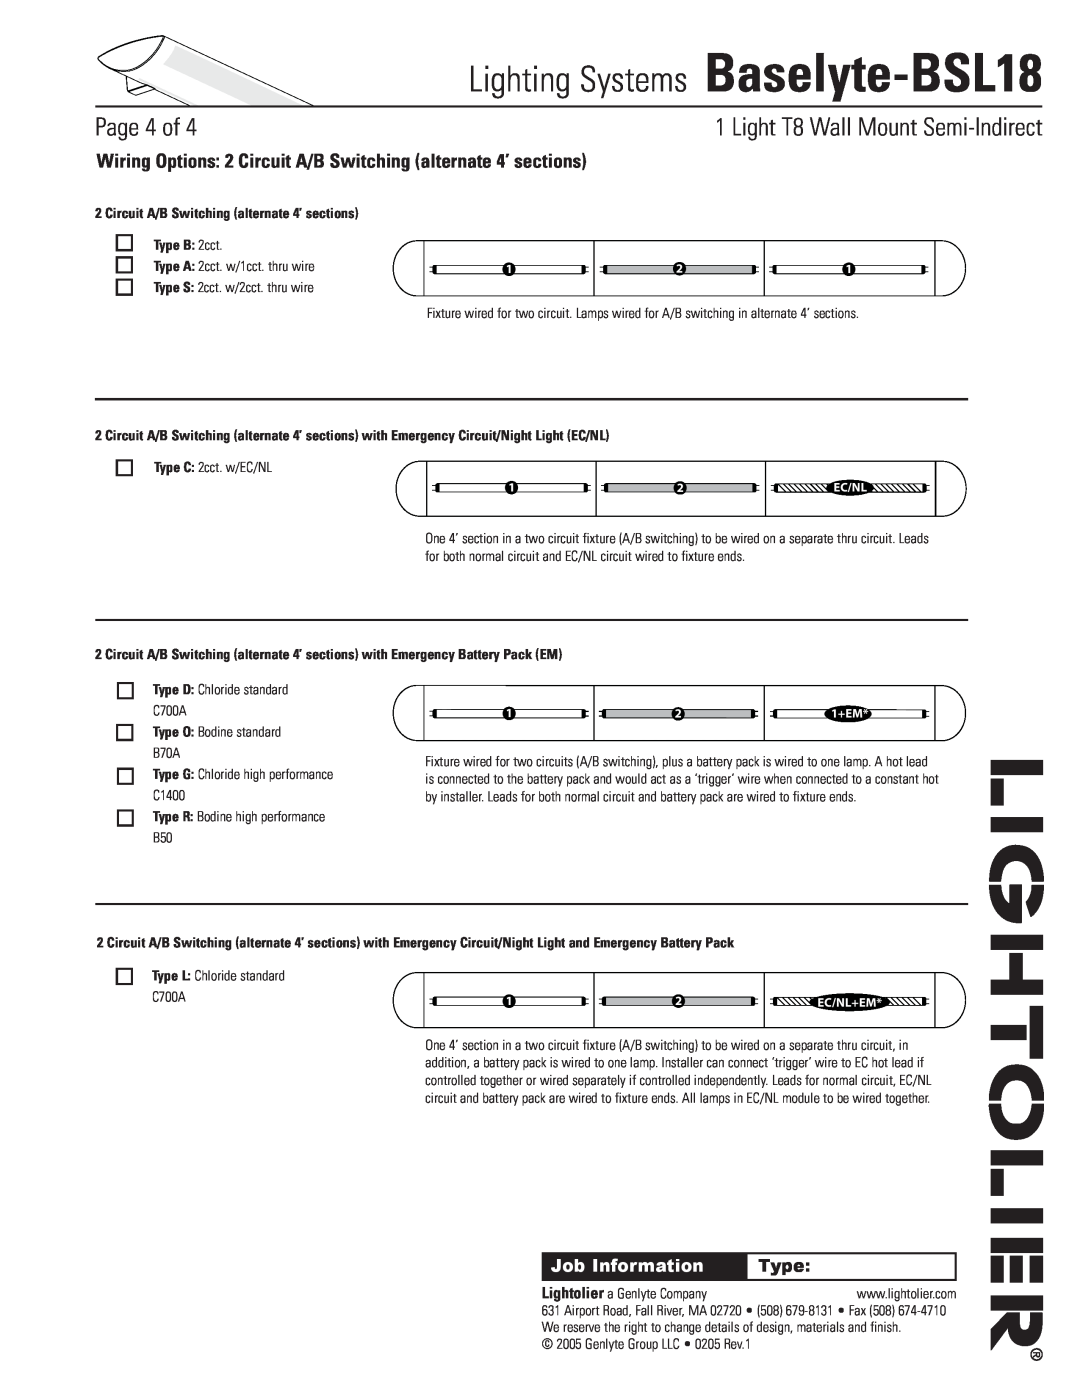 Lightolier Baselyte-BSL18 Circuit A/B Switching alternate 4’ sections, Type B 2cct, Type O Bodine standard B70A, Page of 